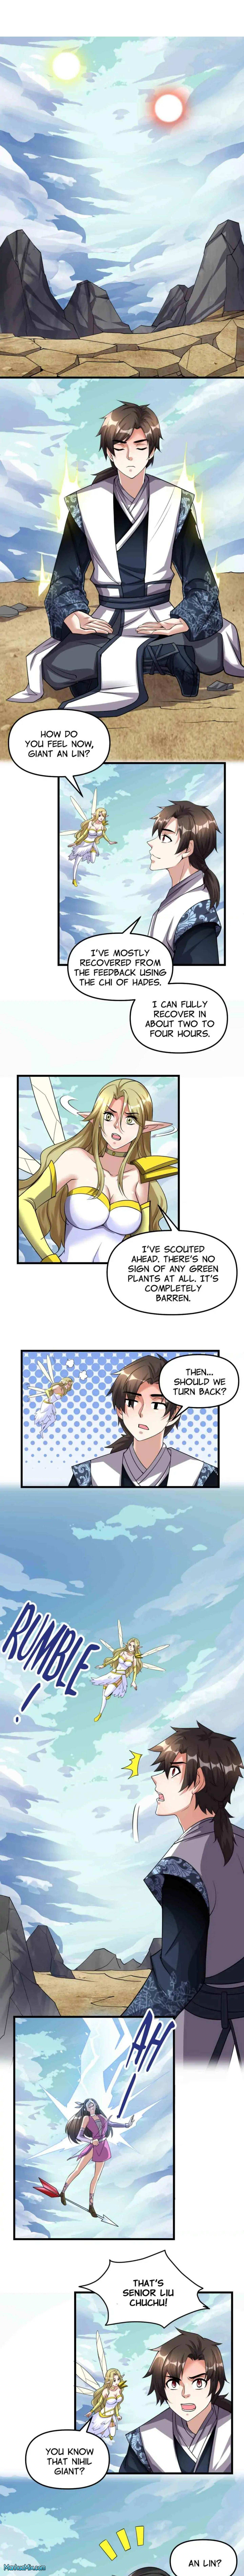 Cultivation, Kidding Me?! - Page 3